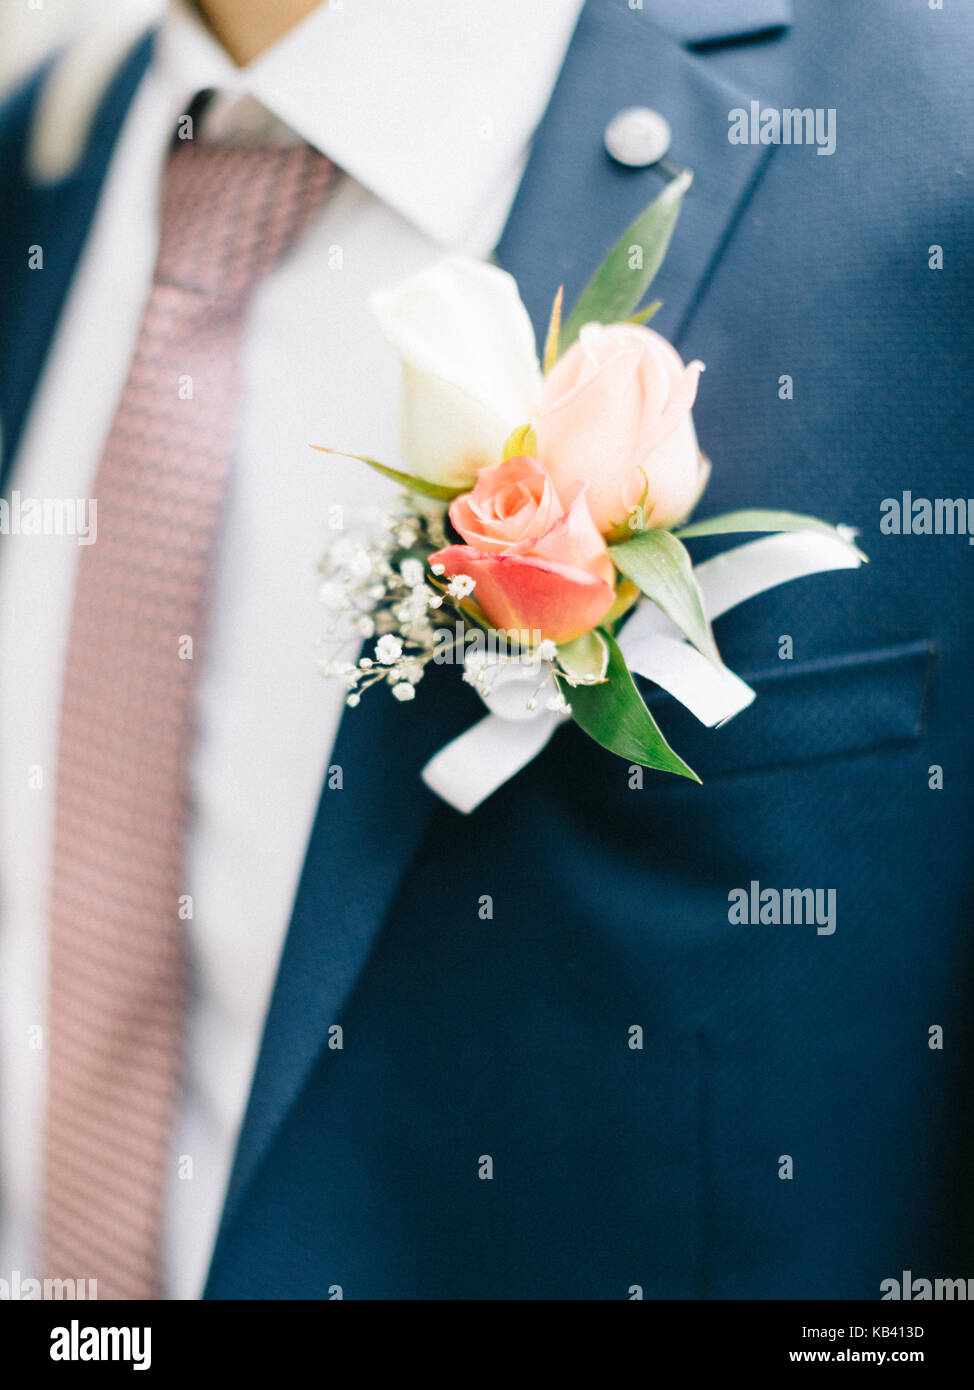 boutonniere flower on suit jacket of wedding groom. groom's boutonniere Stock Photo